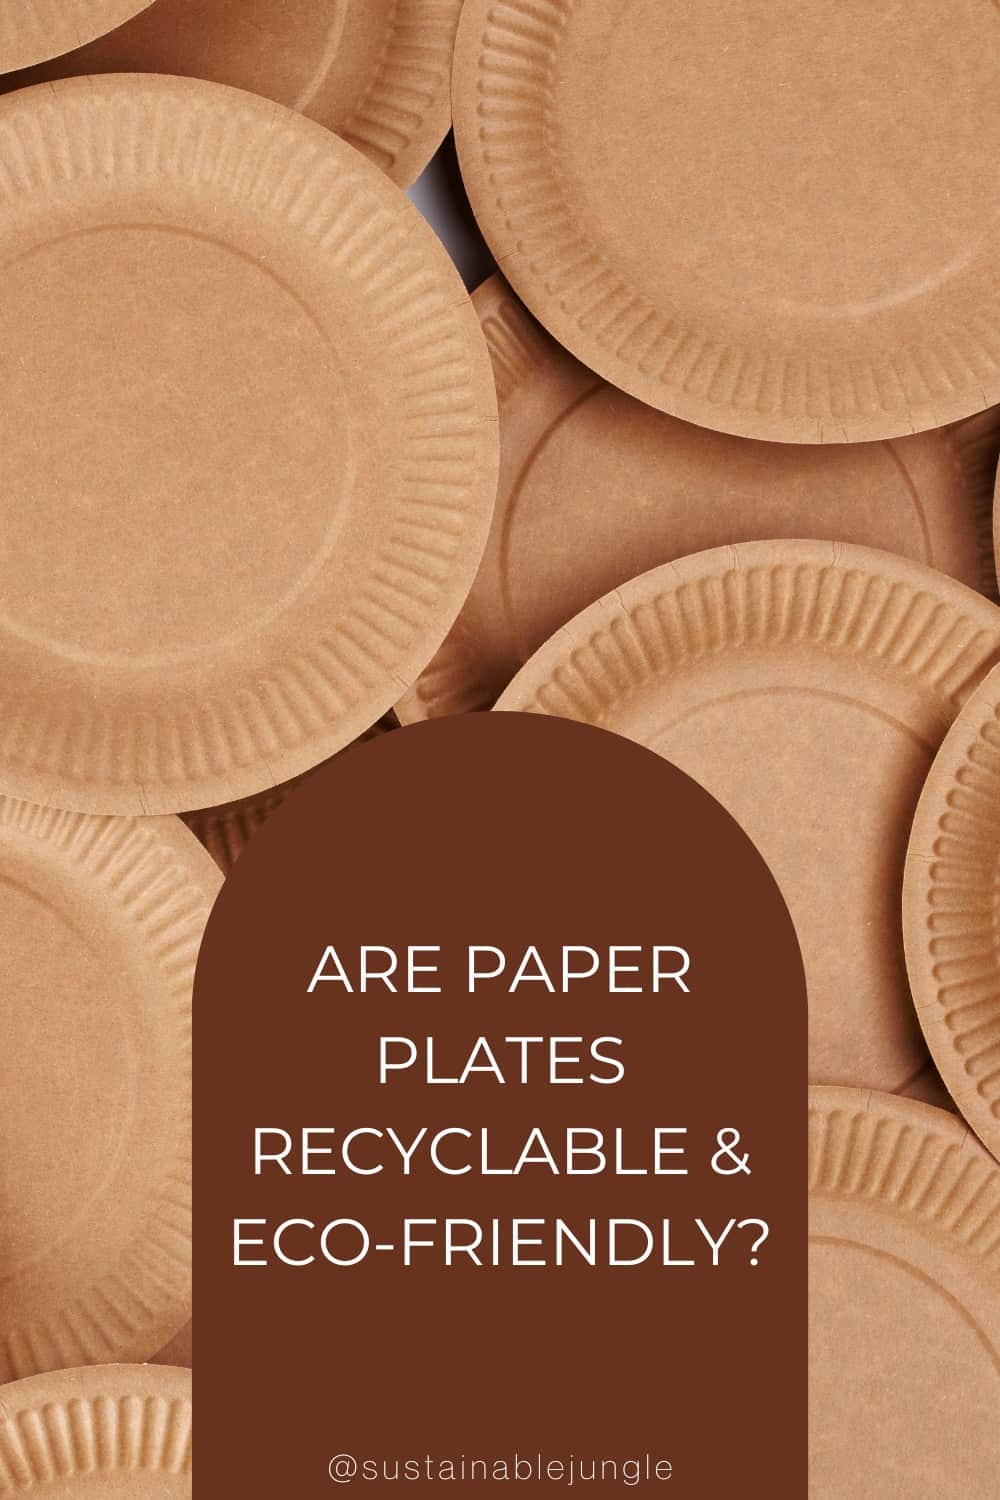 The Truth Behind The Paper: Are Paper Plates Recyclable & Eco-Friendly? Image by Gpoint Studio via Canva Pro #arepaperplatesrecyclable #paperplatesrecyclable #dopaperplatesbiodegrade #arepaperplatesecofrindly #canyourecycledusedpaperplates #sustainablejungle